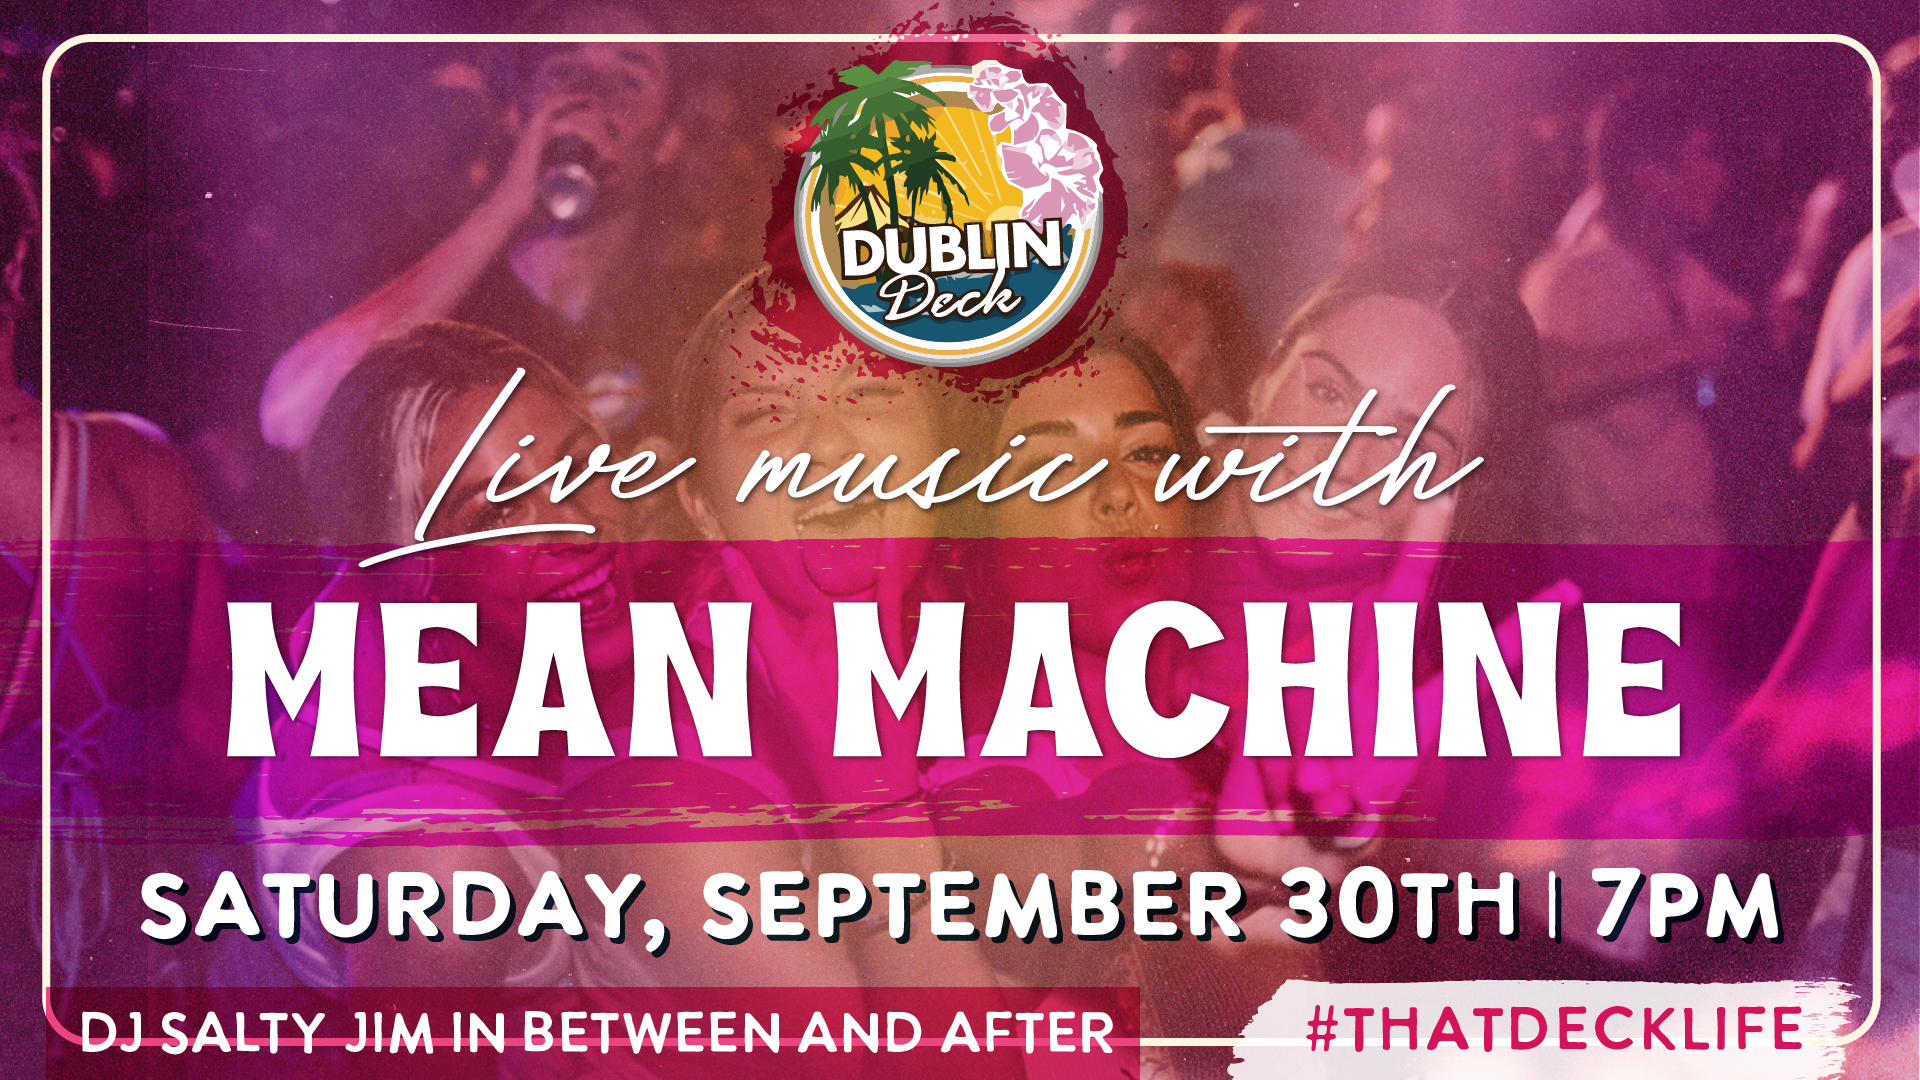 Catch Mean Machine hittin' the stage with us! Music begins at 7PM